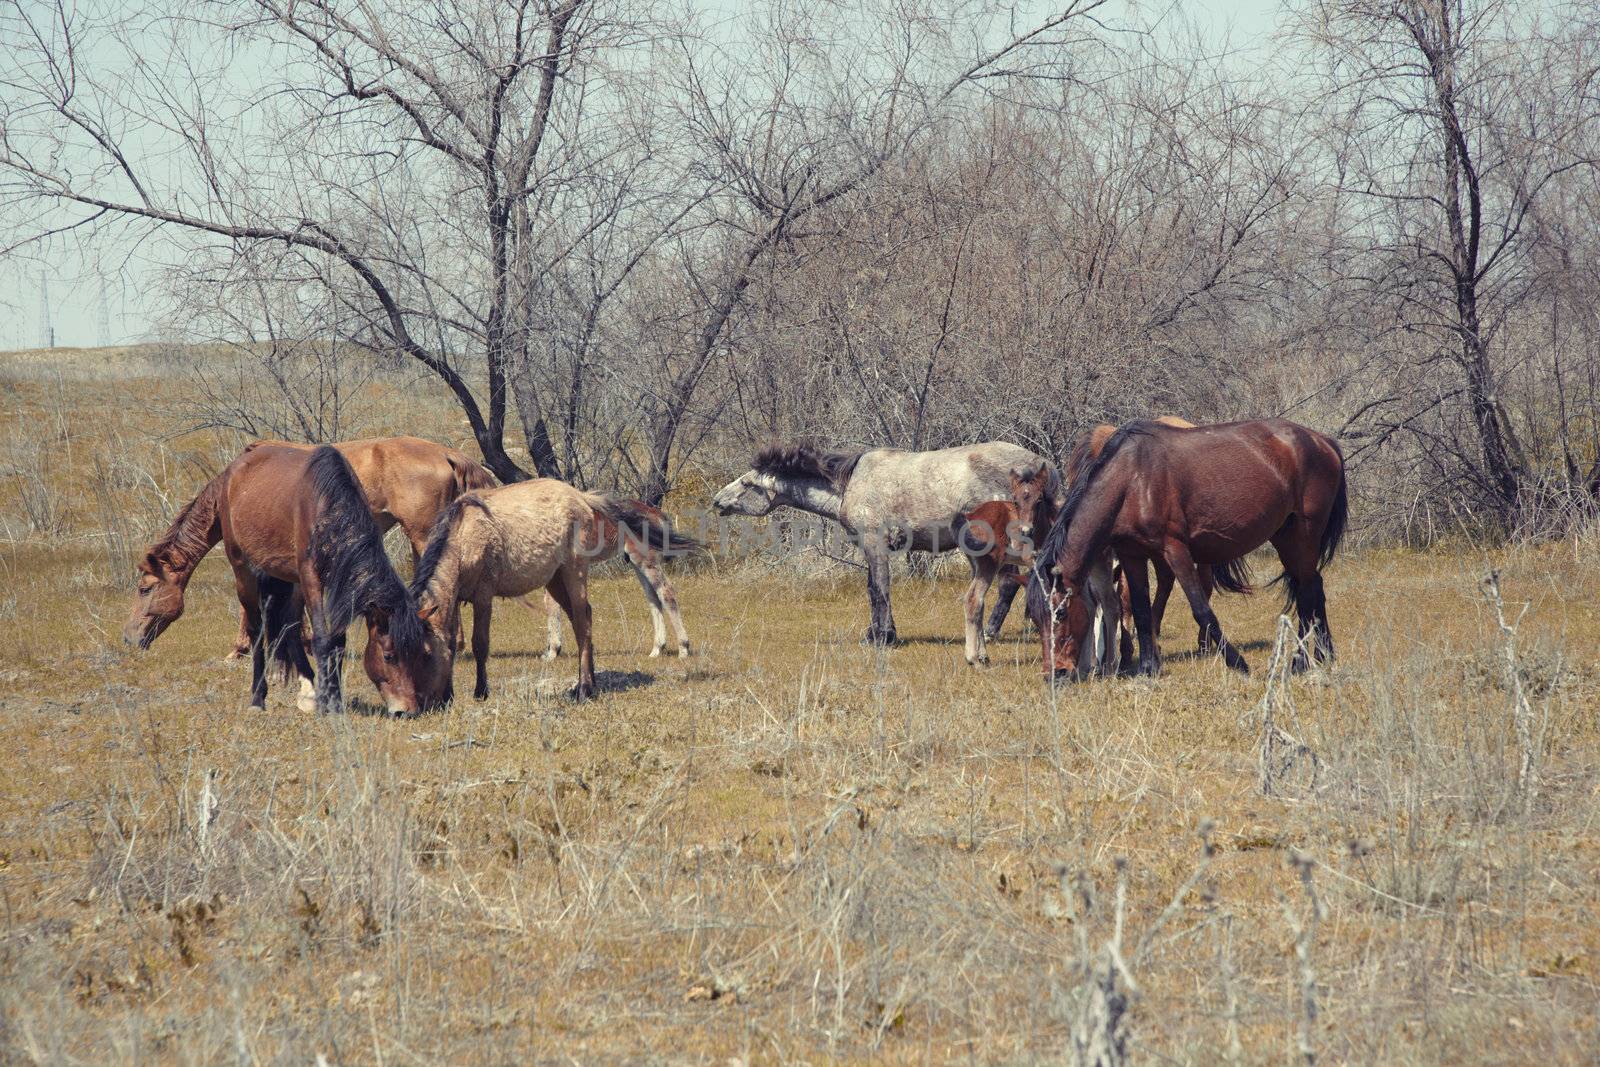 Seven horses outdoors browsing in a steppe. Horizontal photo